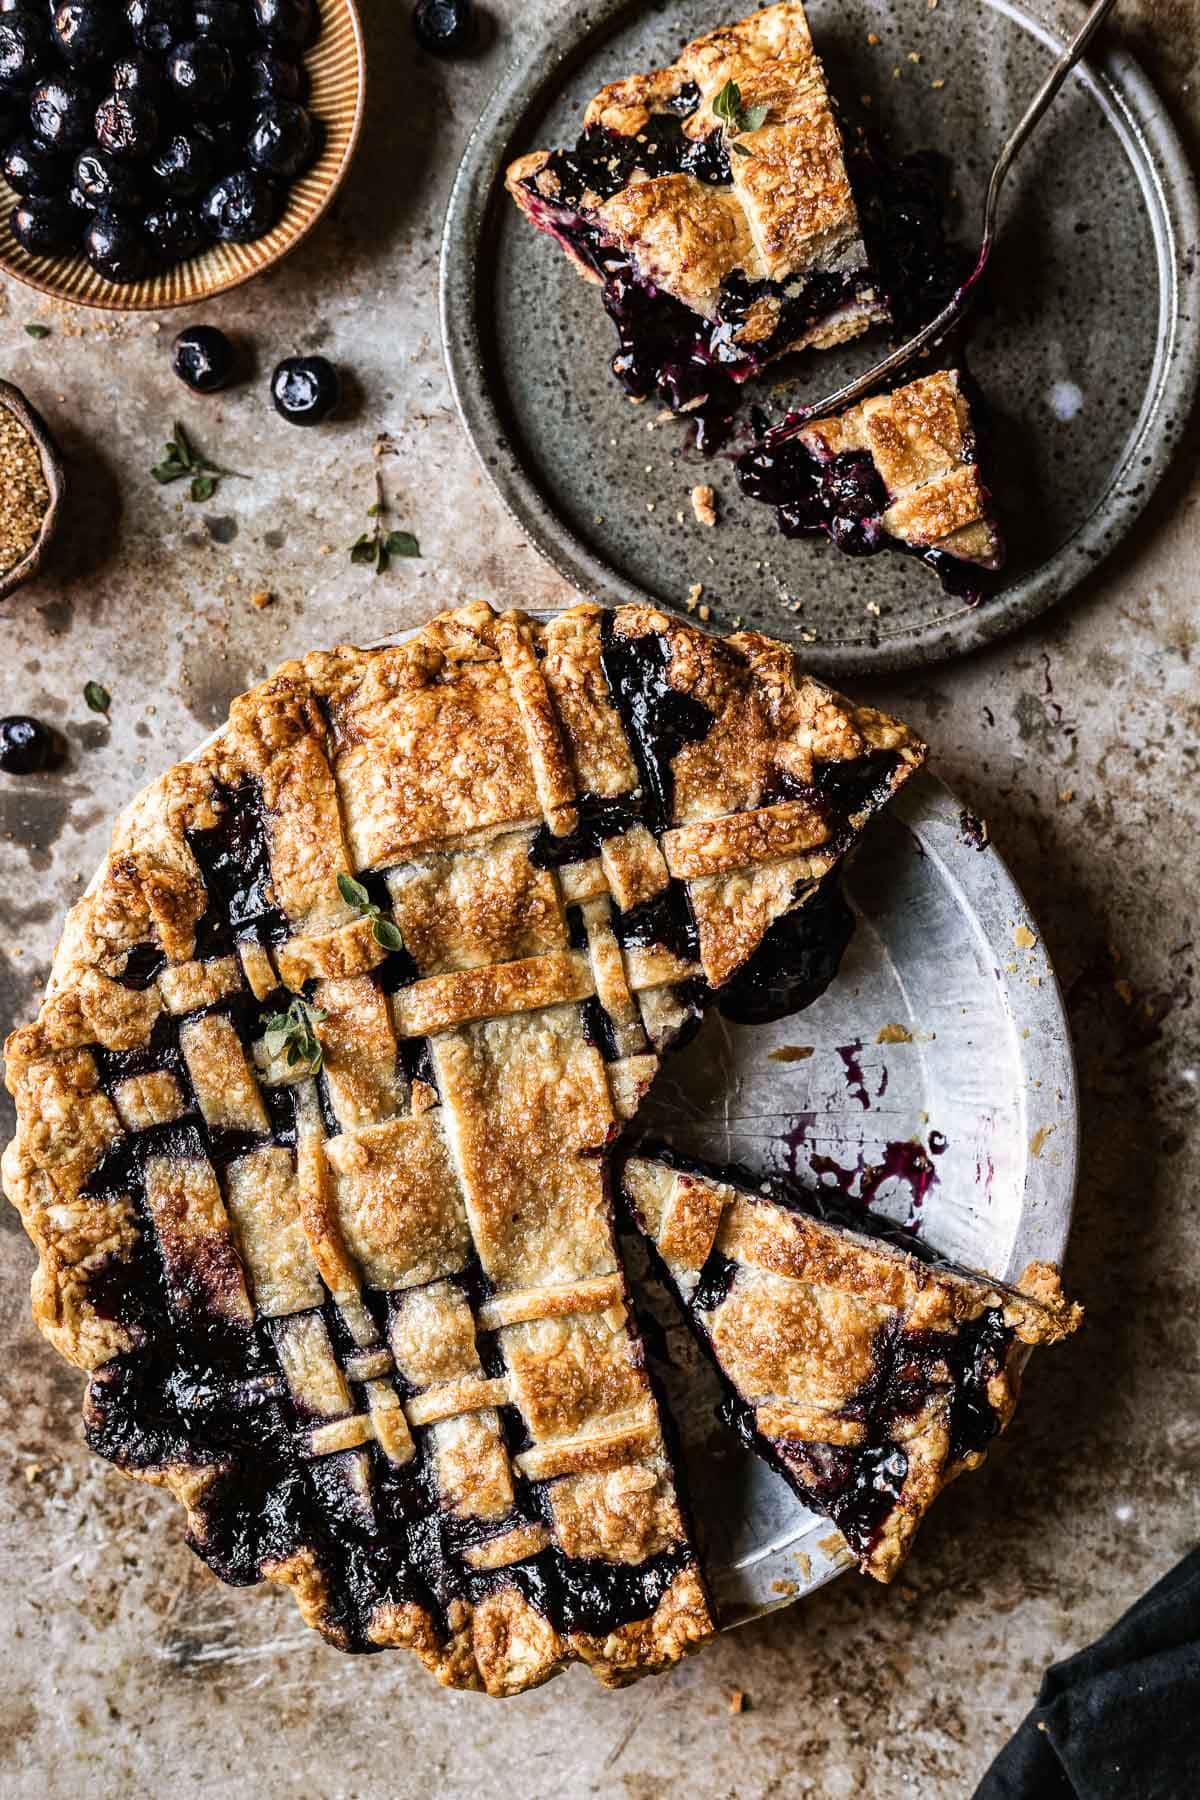 A baked lattice topped blueberry pie with several slices removed from the pan. A single slice sits on a speckled grey plate near the pie pan.